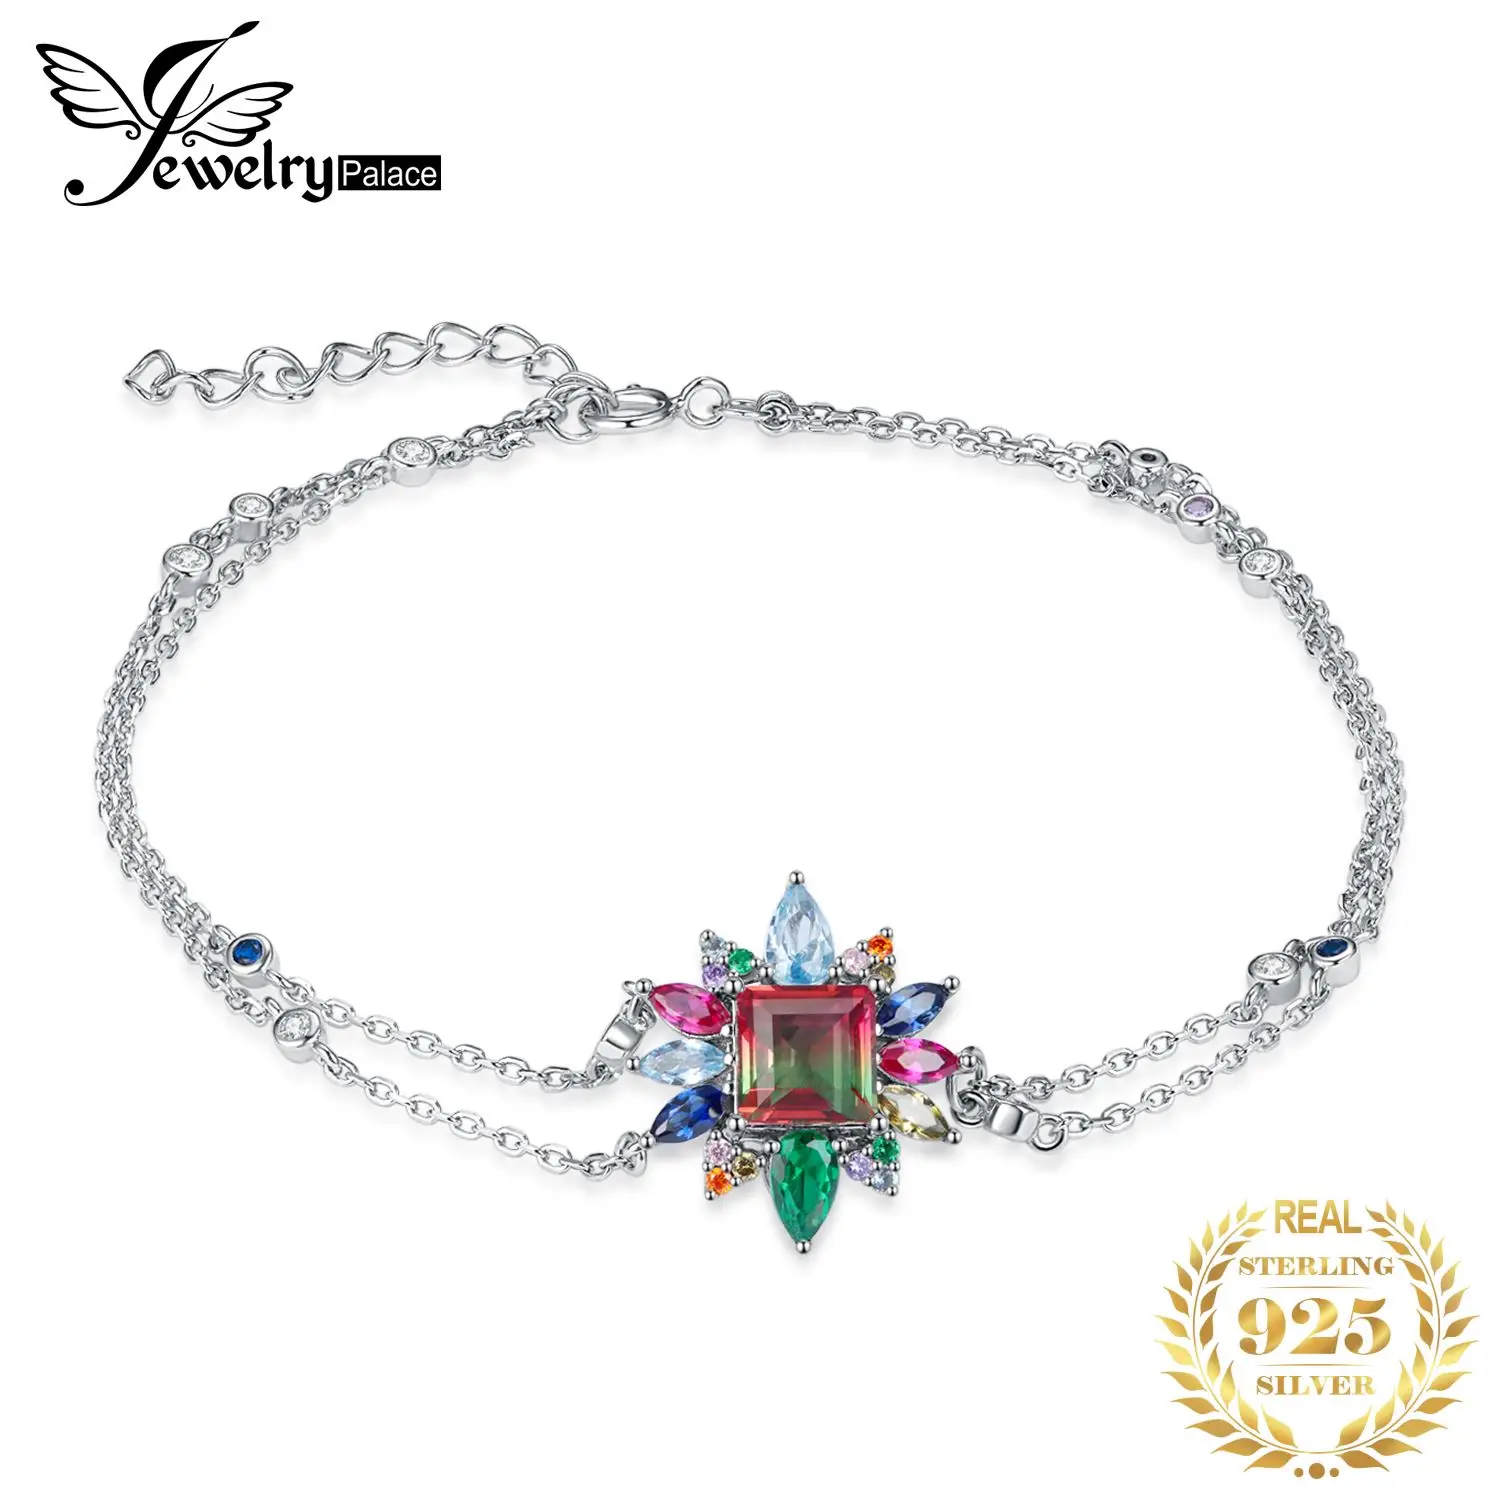 JewelryPalace New Arrival Nano Russian Simulated Watermelon Tourmaline 925 Sterling Silver Adjustable Link Bracelet for Woman